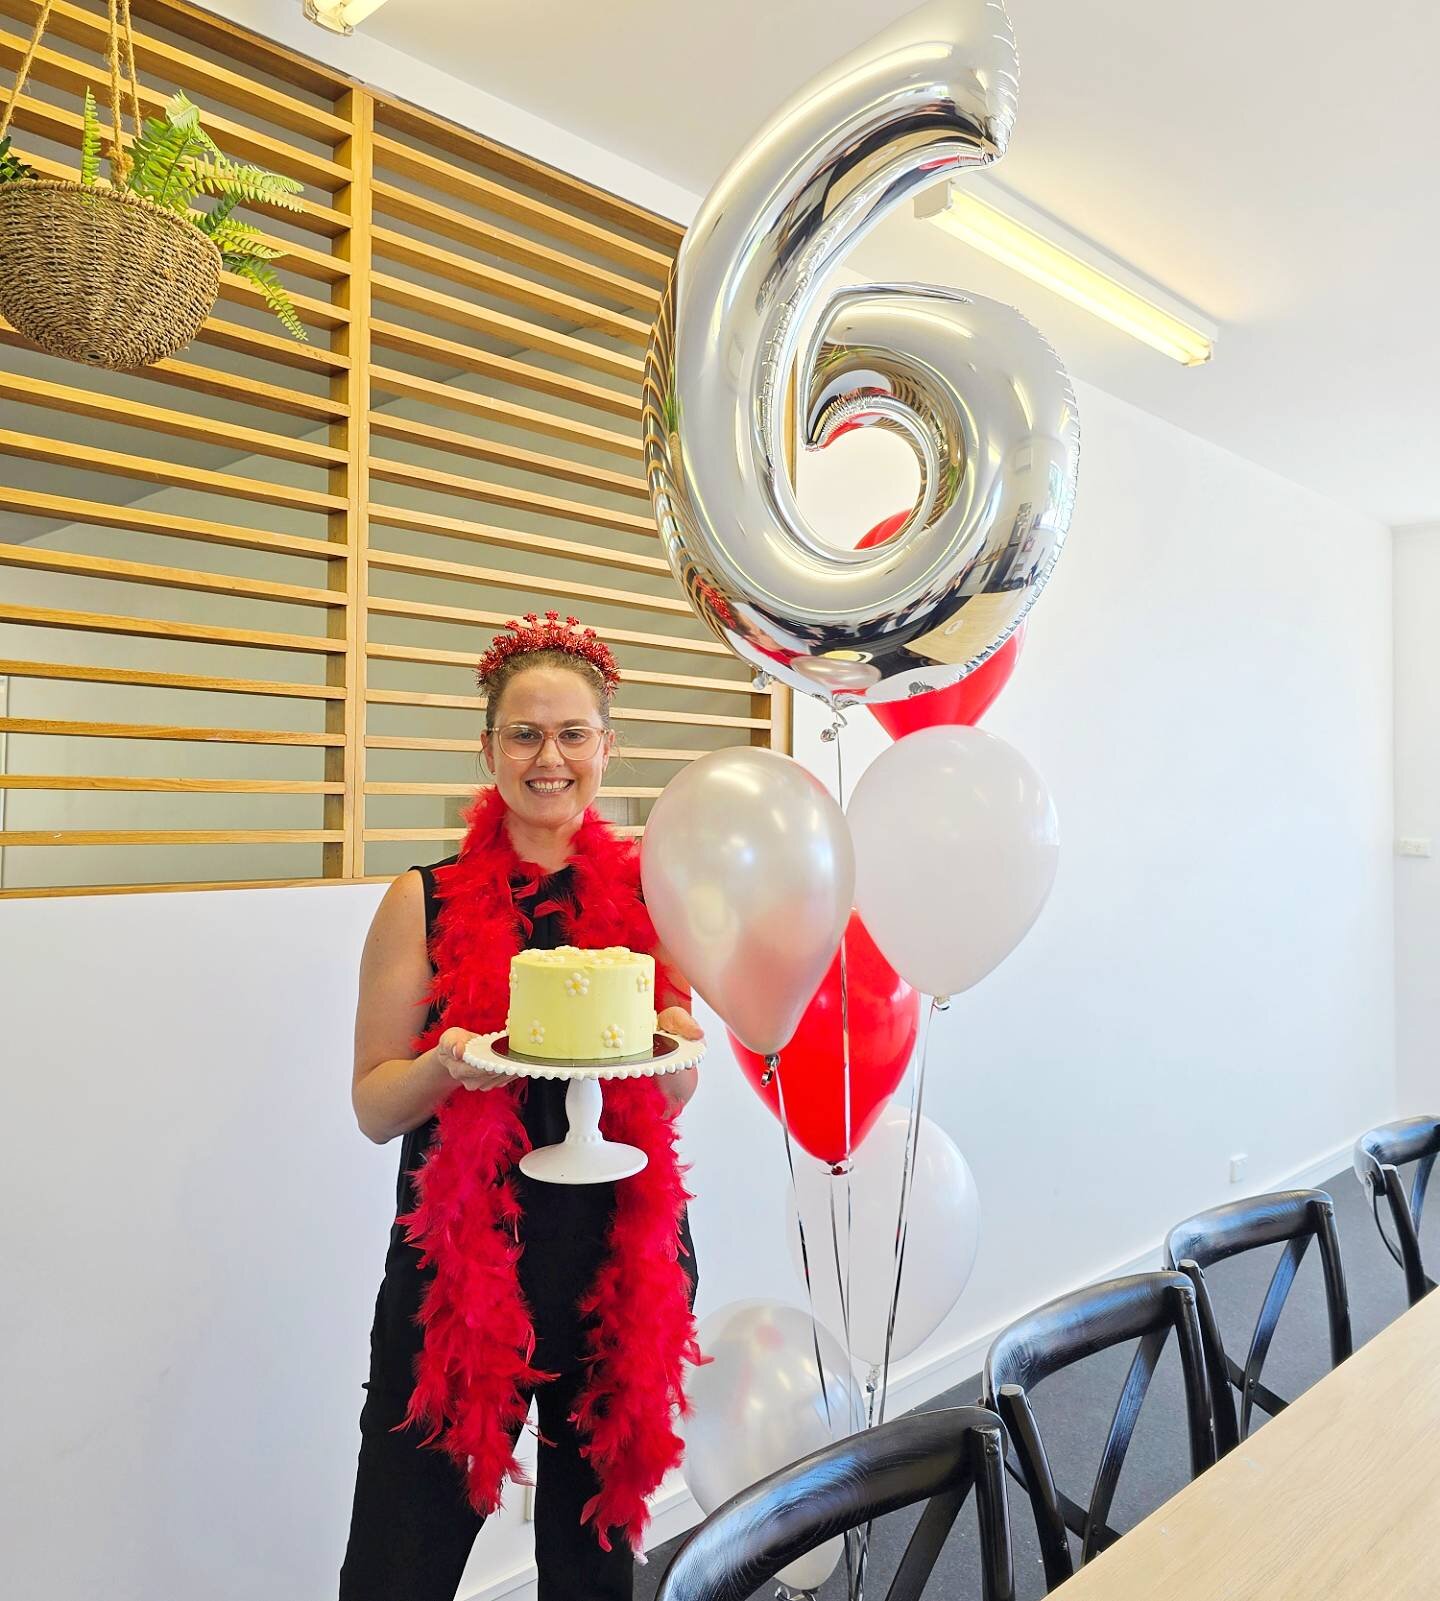 Congrats to Bec on 6 years with Complete Rehab! 🥳